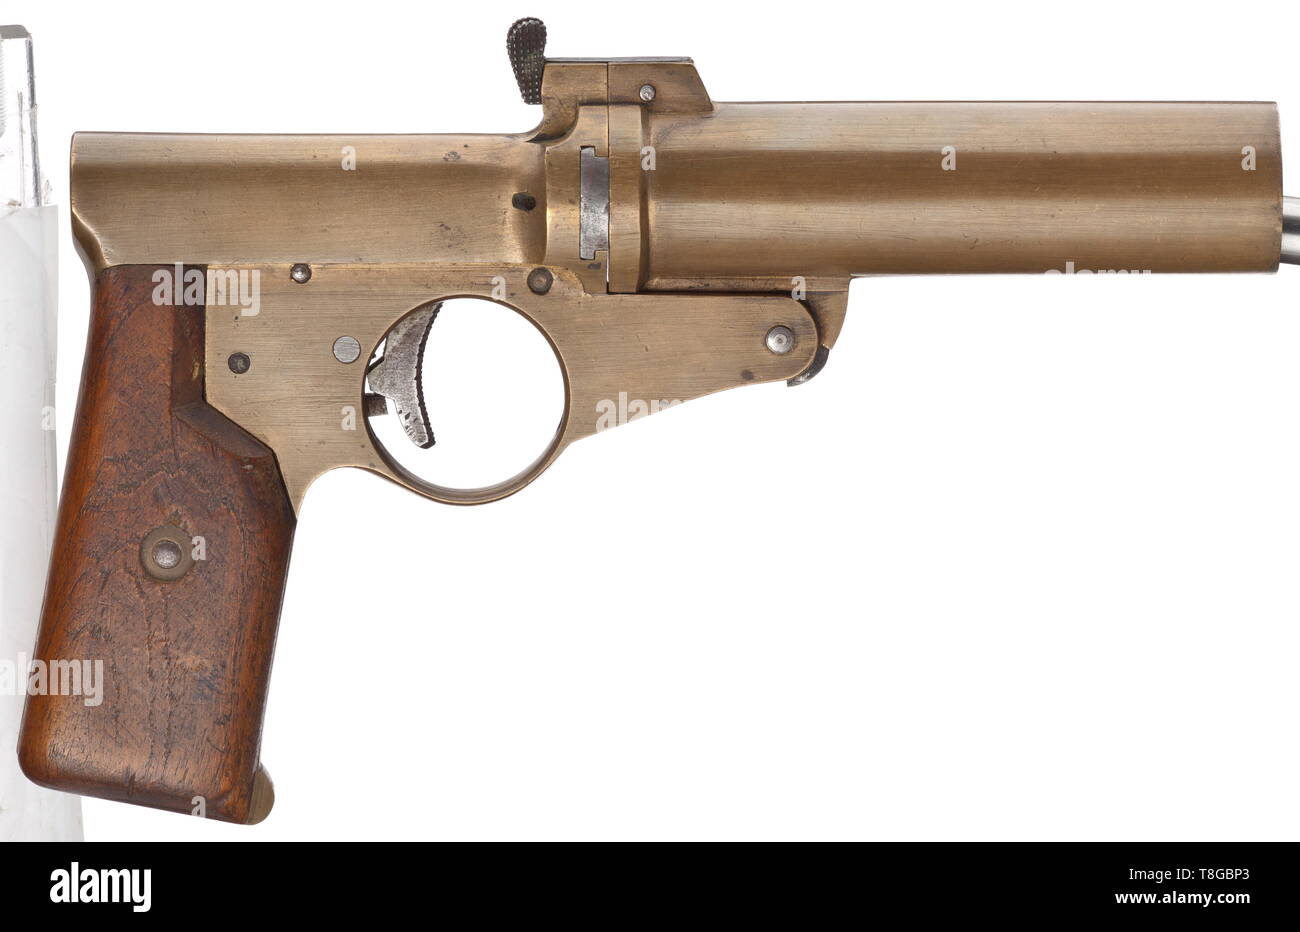 A single-barrelled signal pistol mod. A.W.W, World War I, navy Cal. 4, no. 37. Matching numbers. Drop barrel with snapper lock, length 115 mm. Total length 220 mm. Weight 860 g. Interior hammer. Safety. Signal pin. Construction attributed to Artilleriewerkstätten Wilhelmshaven (A.W.W.). On pommel navy acceptance mark crown/M. No further stamps or inscriptions. Brass grip frame and barrel. Ribbed trigger, opening lever, breech-block, safety, mechanical parts and screws made of steel. Matching-numbered, smooth walnut grip panels. A mostly unknown a, Additional-Rights-Clearance-Info-Not-Available Stock Photo